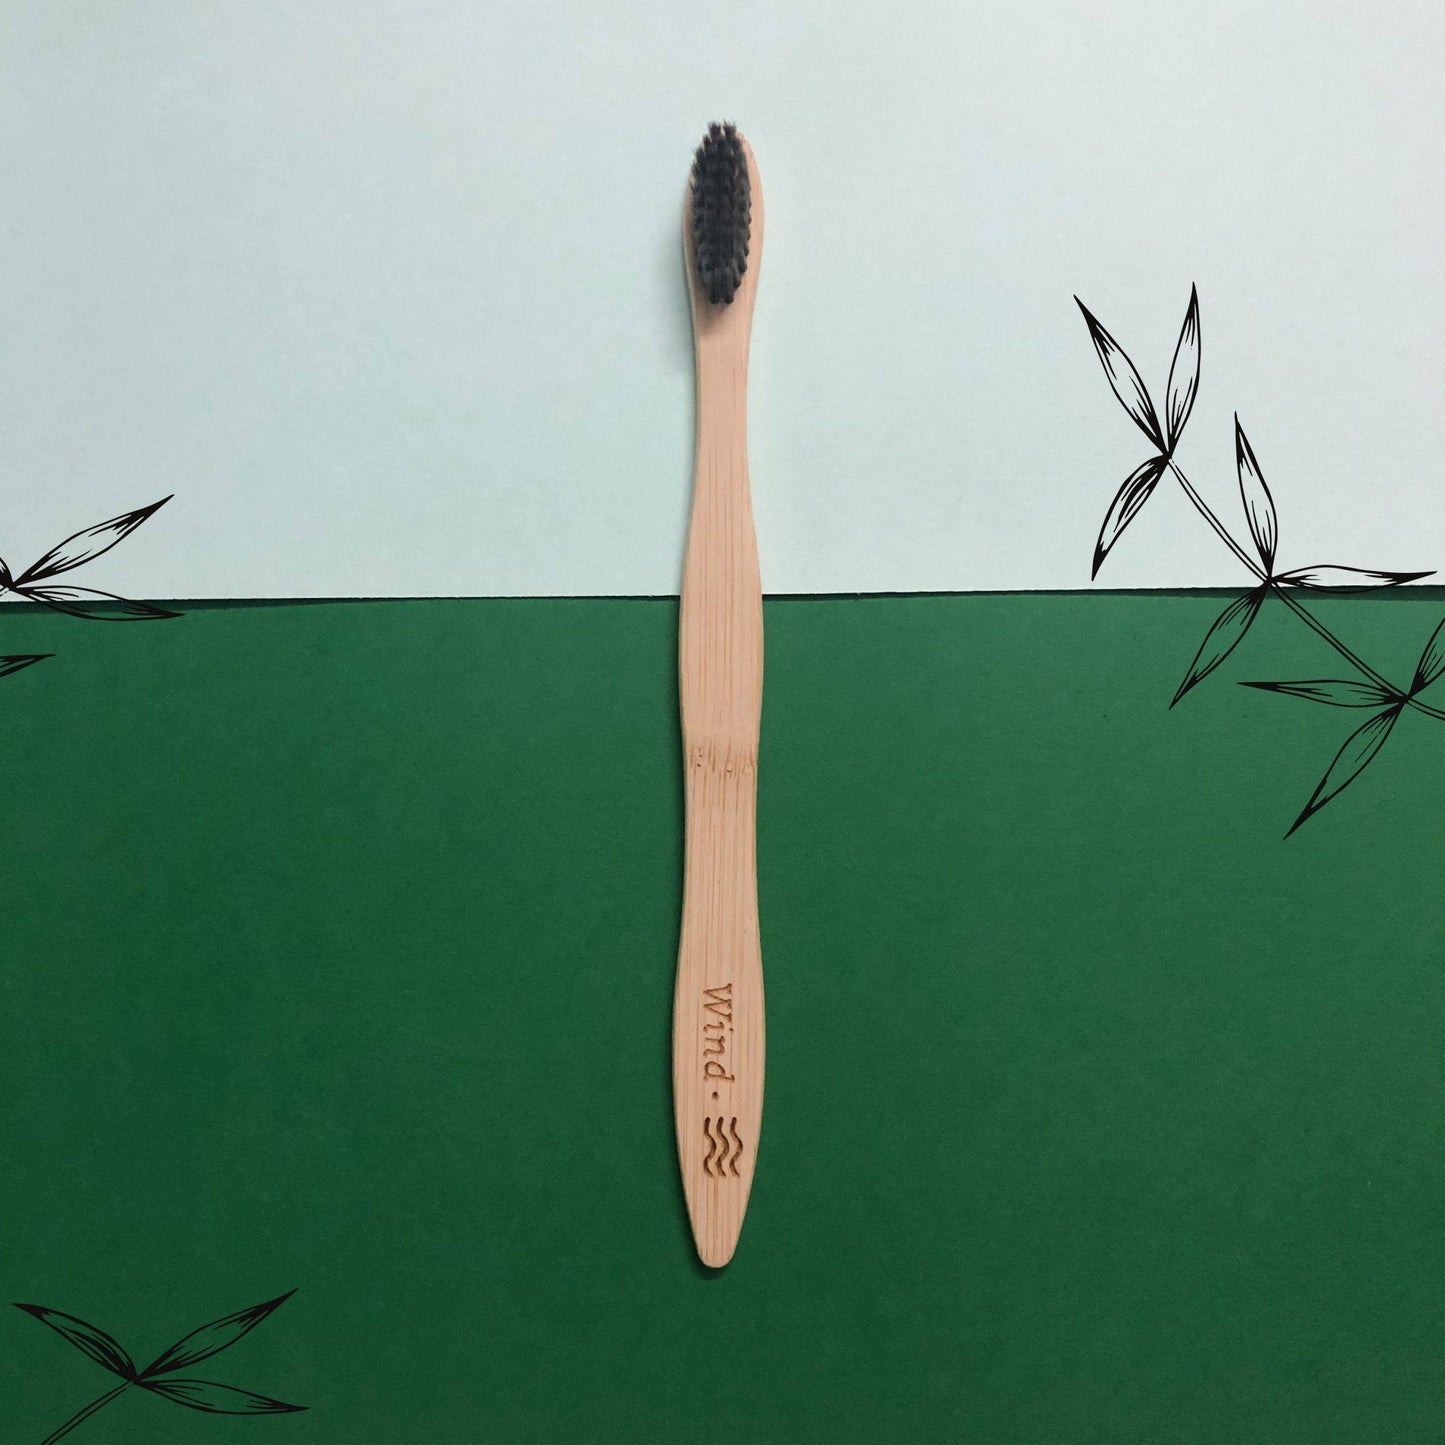 100% Biodegradable Bamboo Toothbrush with Soft Charcoal-activated Bristles - Wind